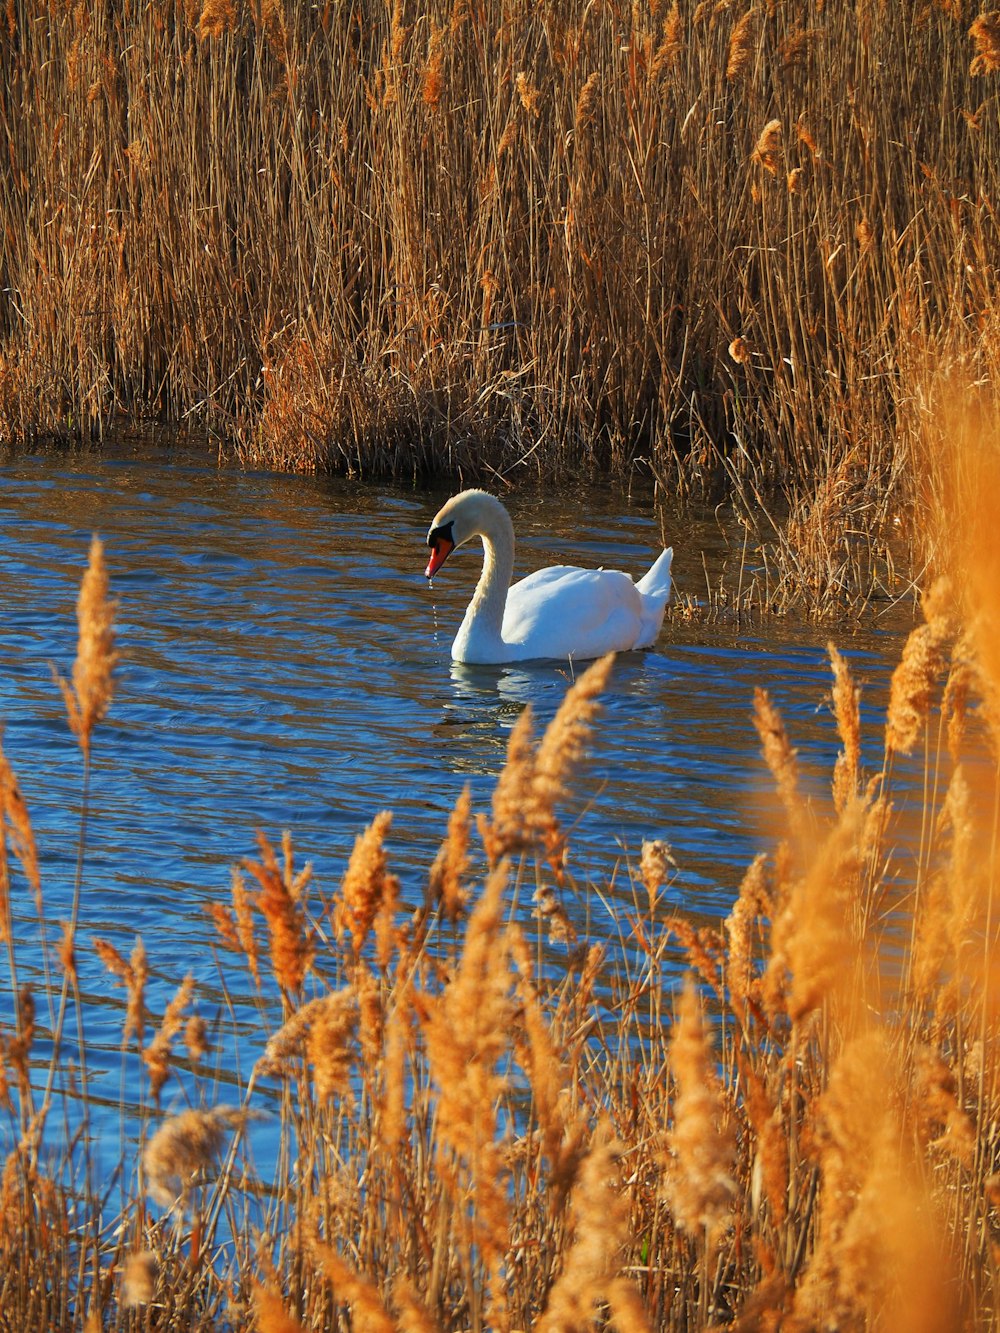 a white swan swimming in a pond surrounded by tall grass